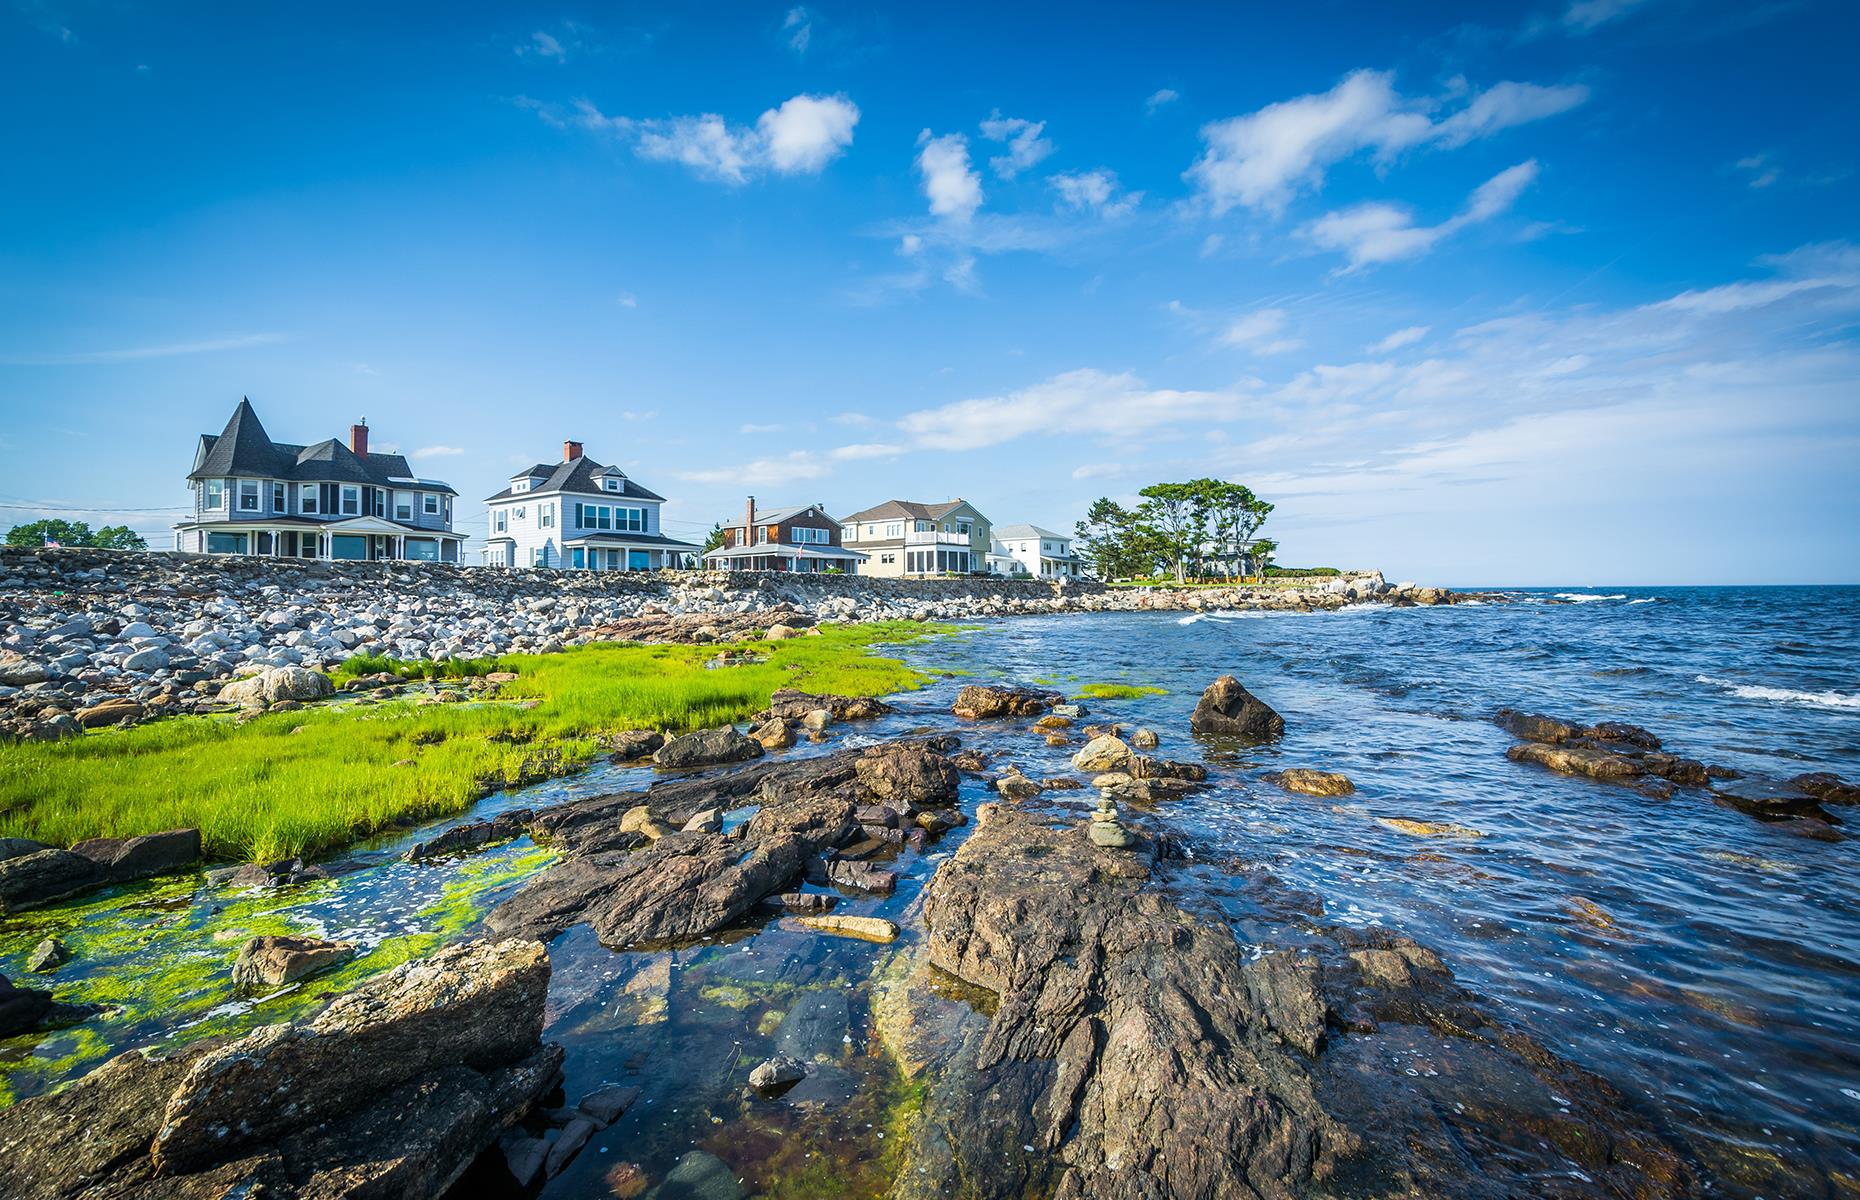 <p>Just over an hour away from Boston, this charming coastal town feels like a world away with its rugged rocky shore, peaceful beaches and the fantastic <a href="https://www.nhstateparks.org/visit/state-parks/odiorne-point-state-park">Odiorne Point State Park</a>. Sandwiched between The Hamptons and Portsmouth, Rye is a much more laid-back destination with excellent lobster shacks dotting the area between Rye's two beaches. Remember that if you're traveling to New Hampshire from non-New England states for an extended period of time, <a href="https://www.covidguidance.nh.gov/out-state-visitors">you're asked to self-isolate for two weeks</a>.</p>